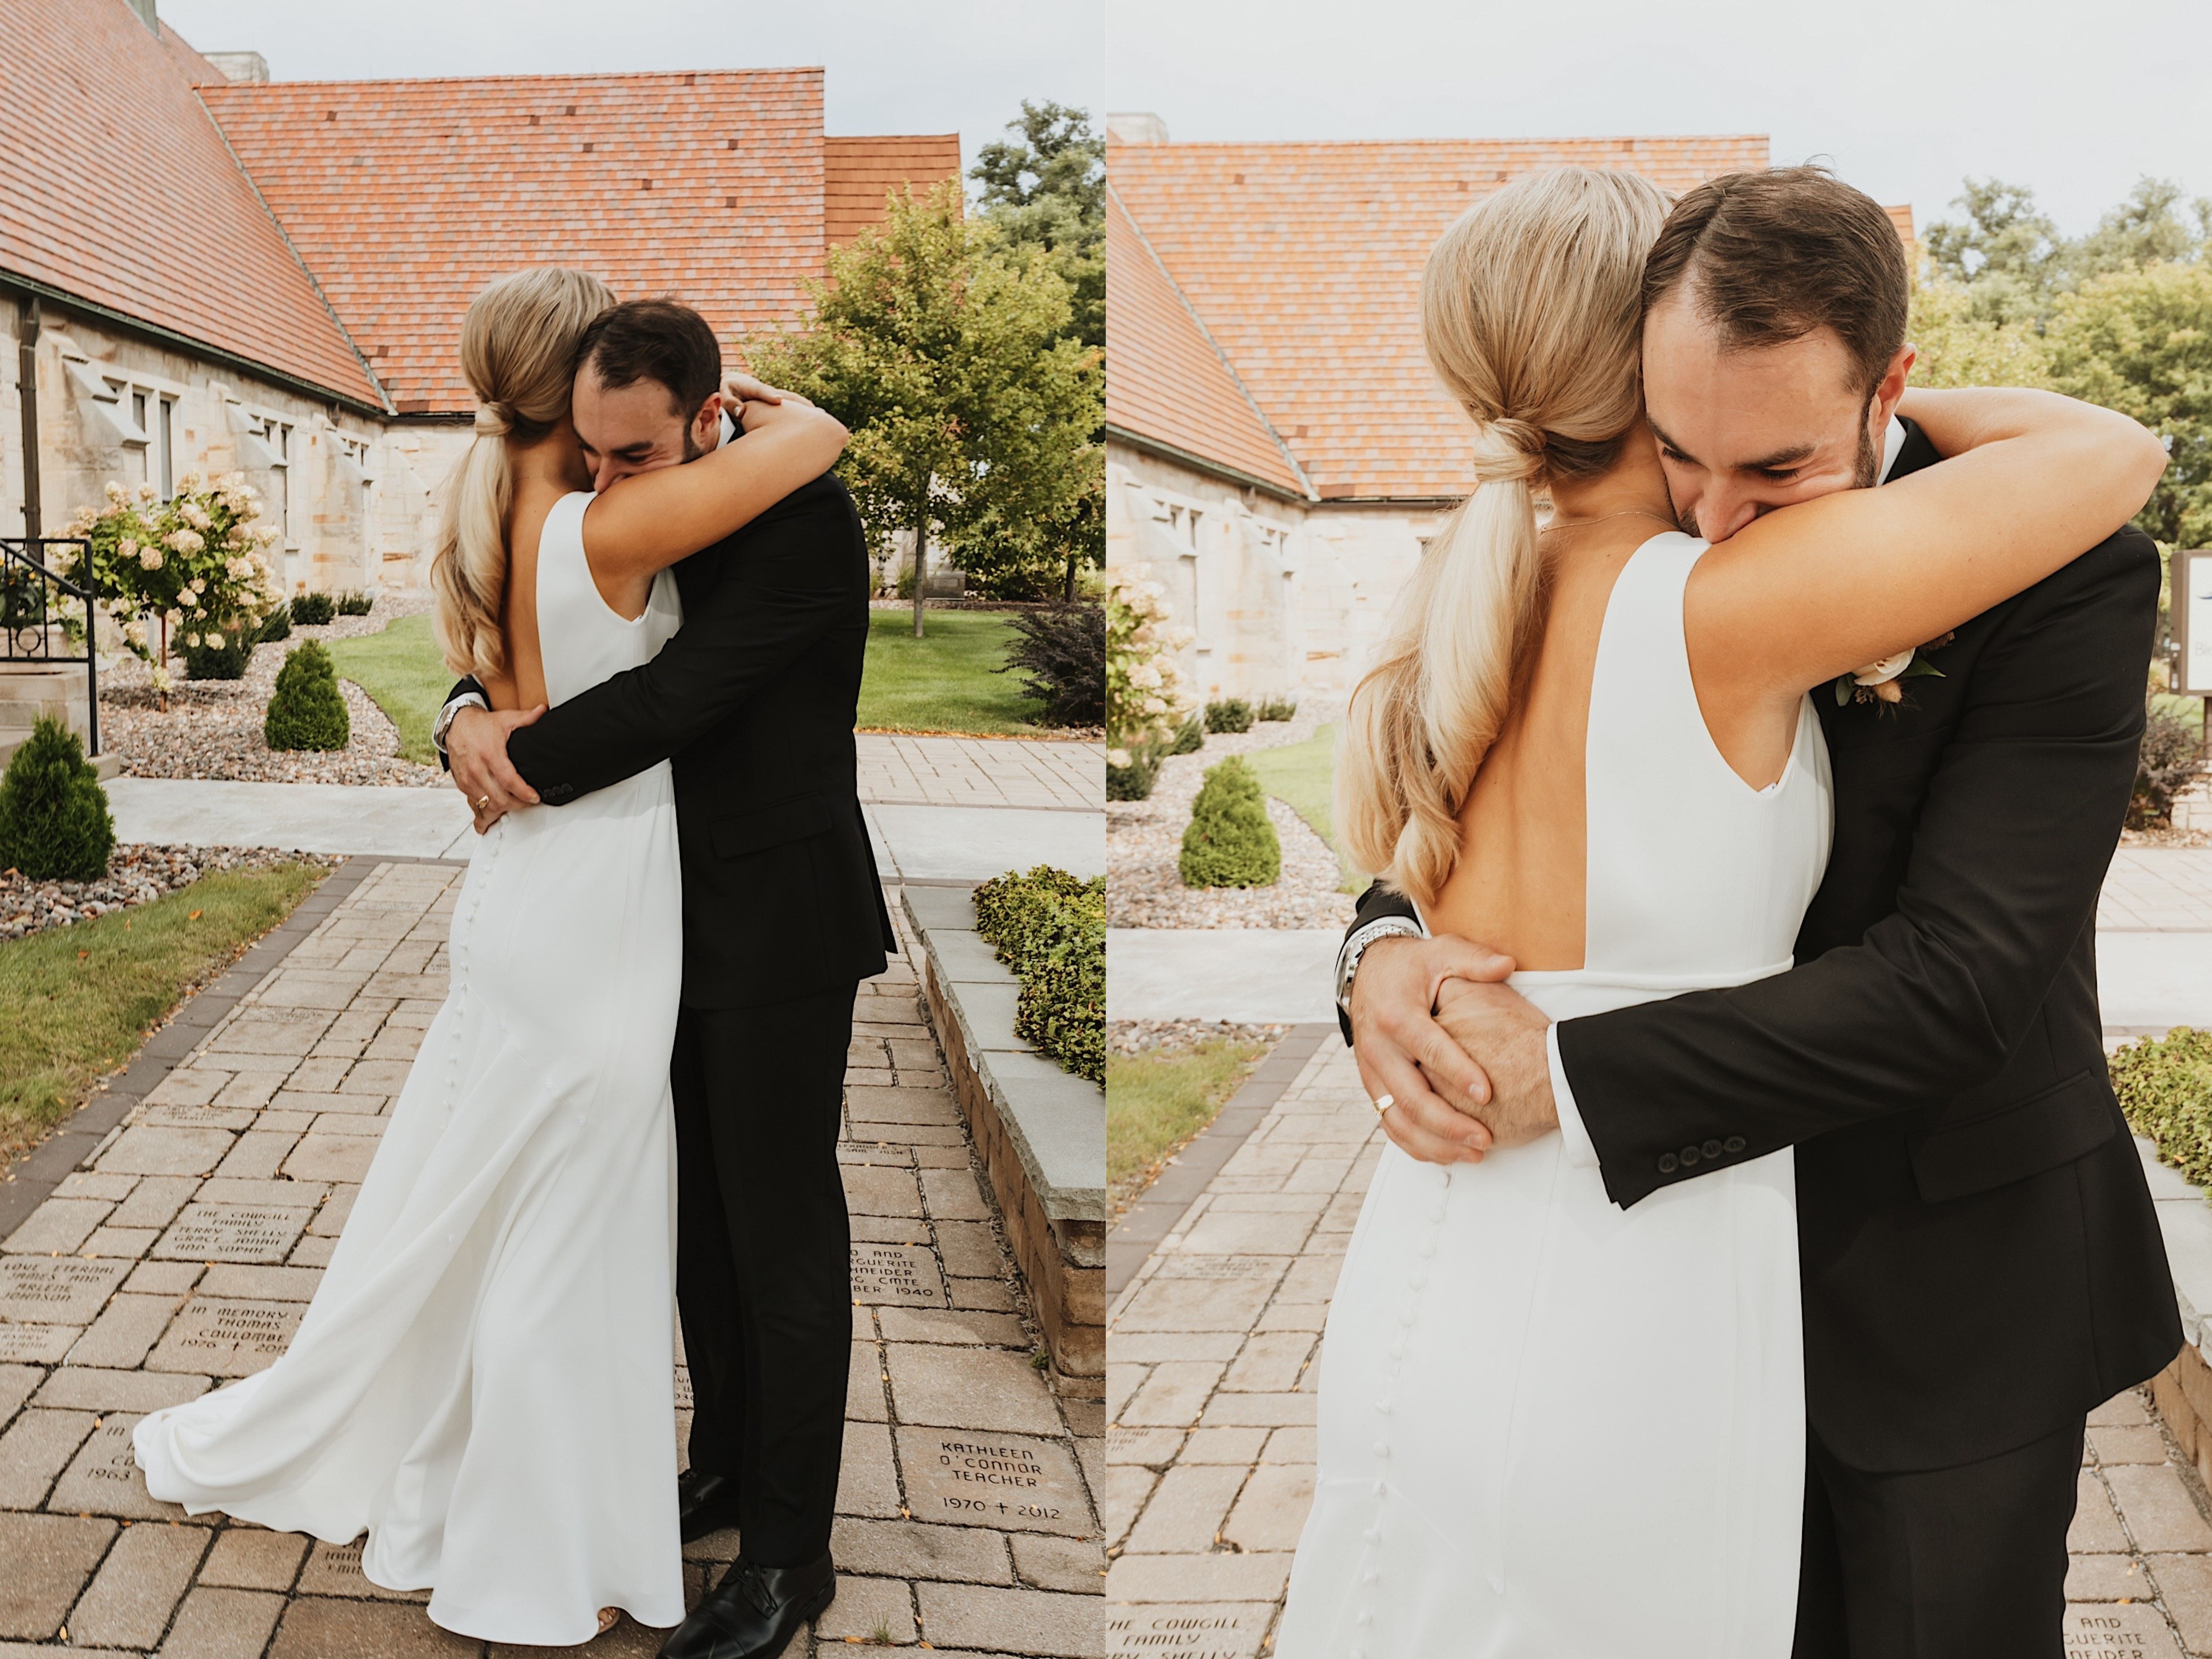 2 photos next to one another of a bride and groom hugging each other, the right photo is a closeup